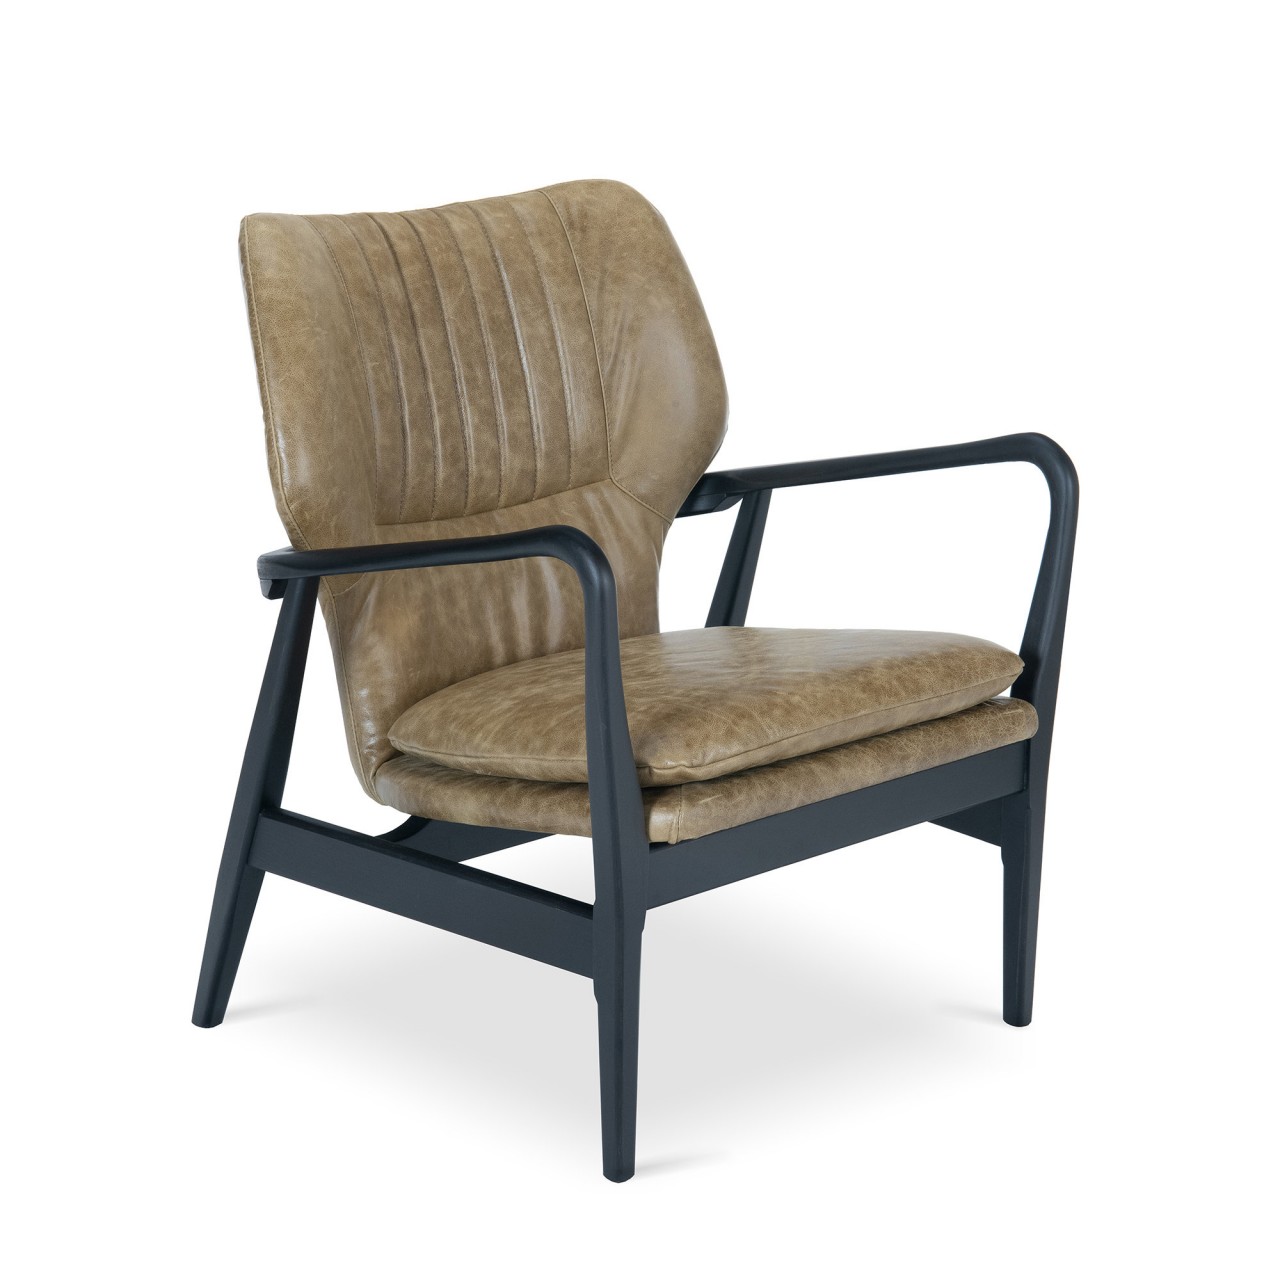 BRODY CHAIR - CAMBRIDGE Sage Leather